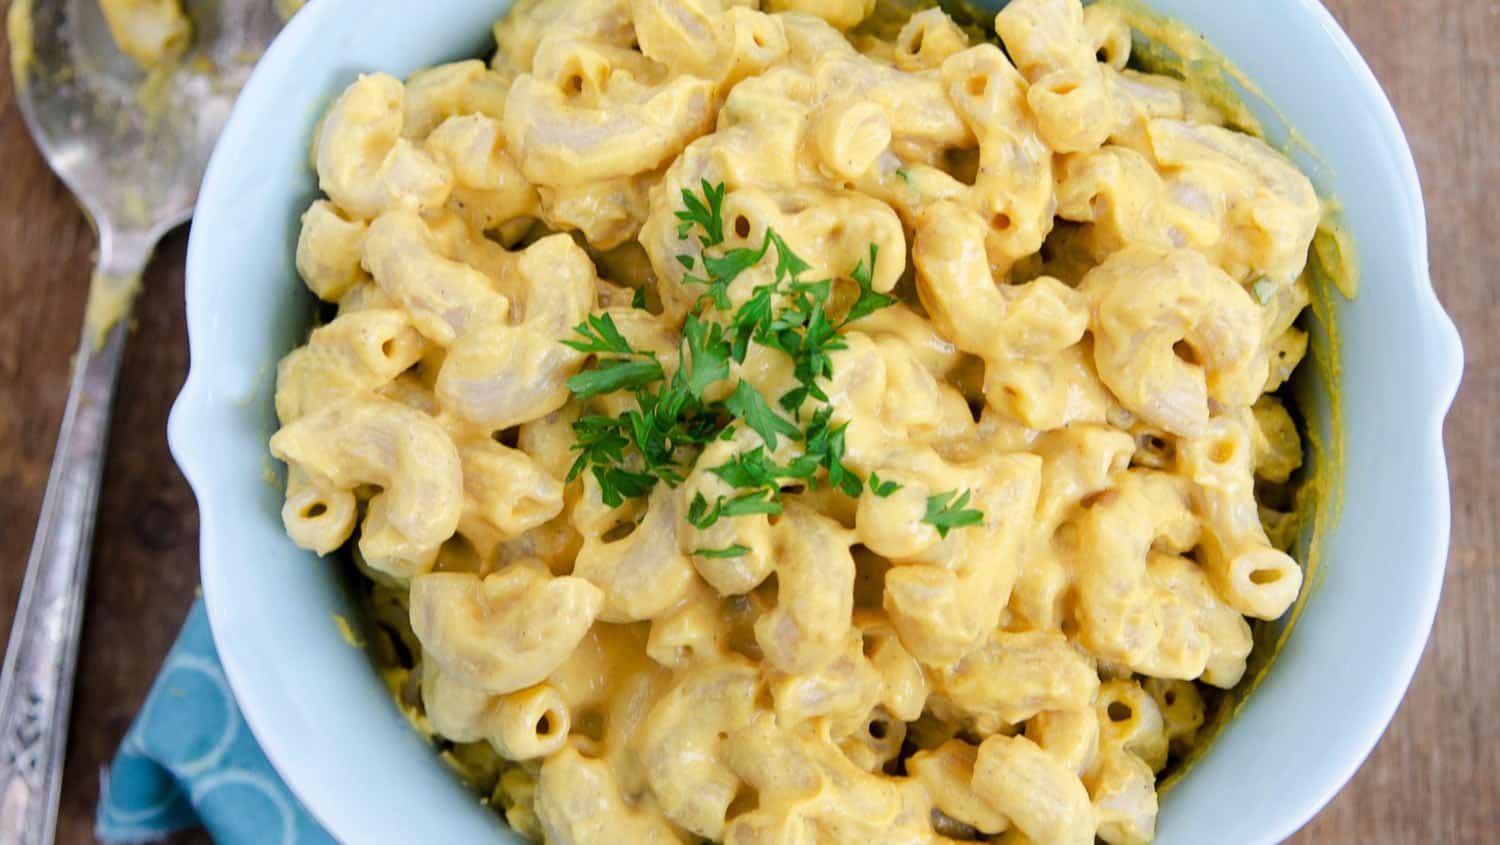 vegan mac and cheese in a bowl with parsley garnish